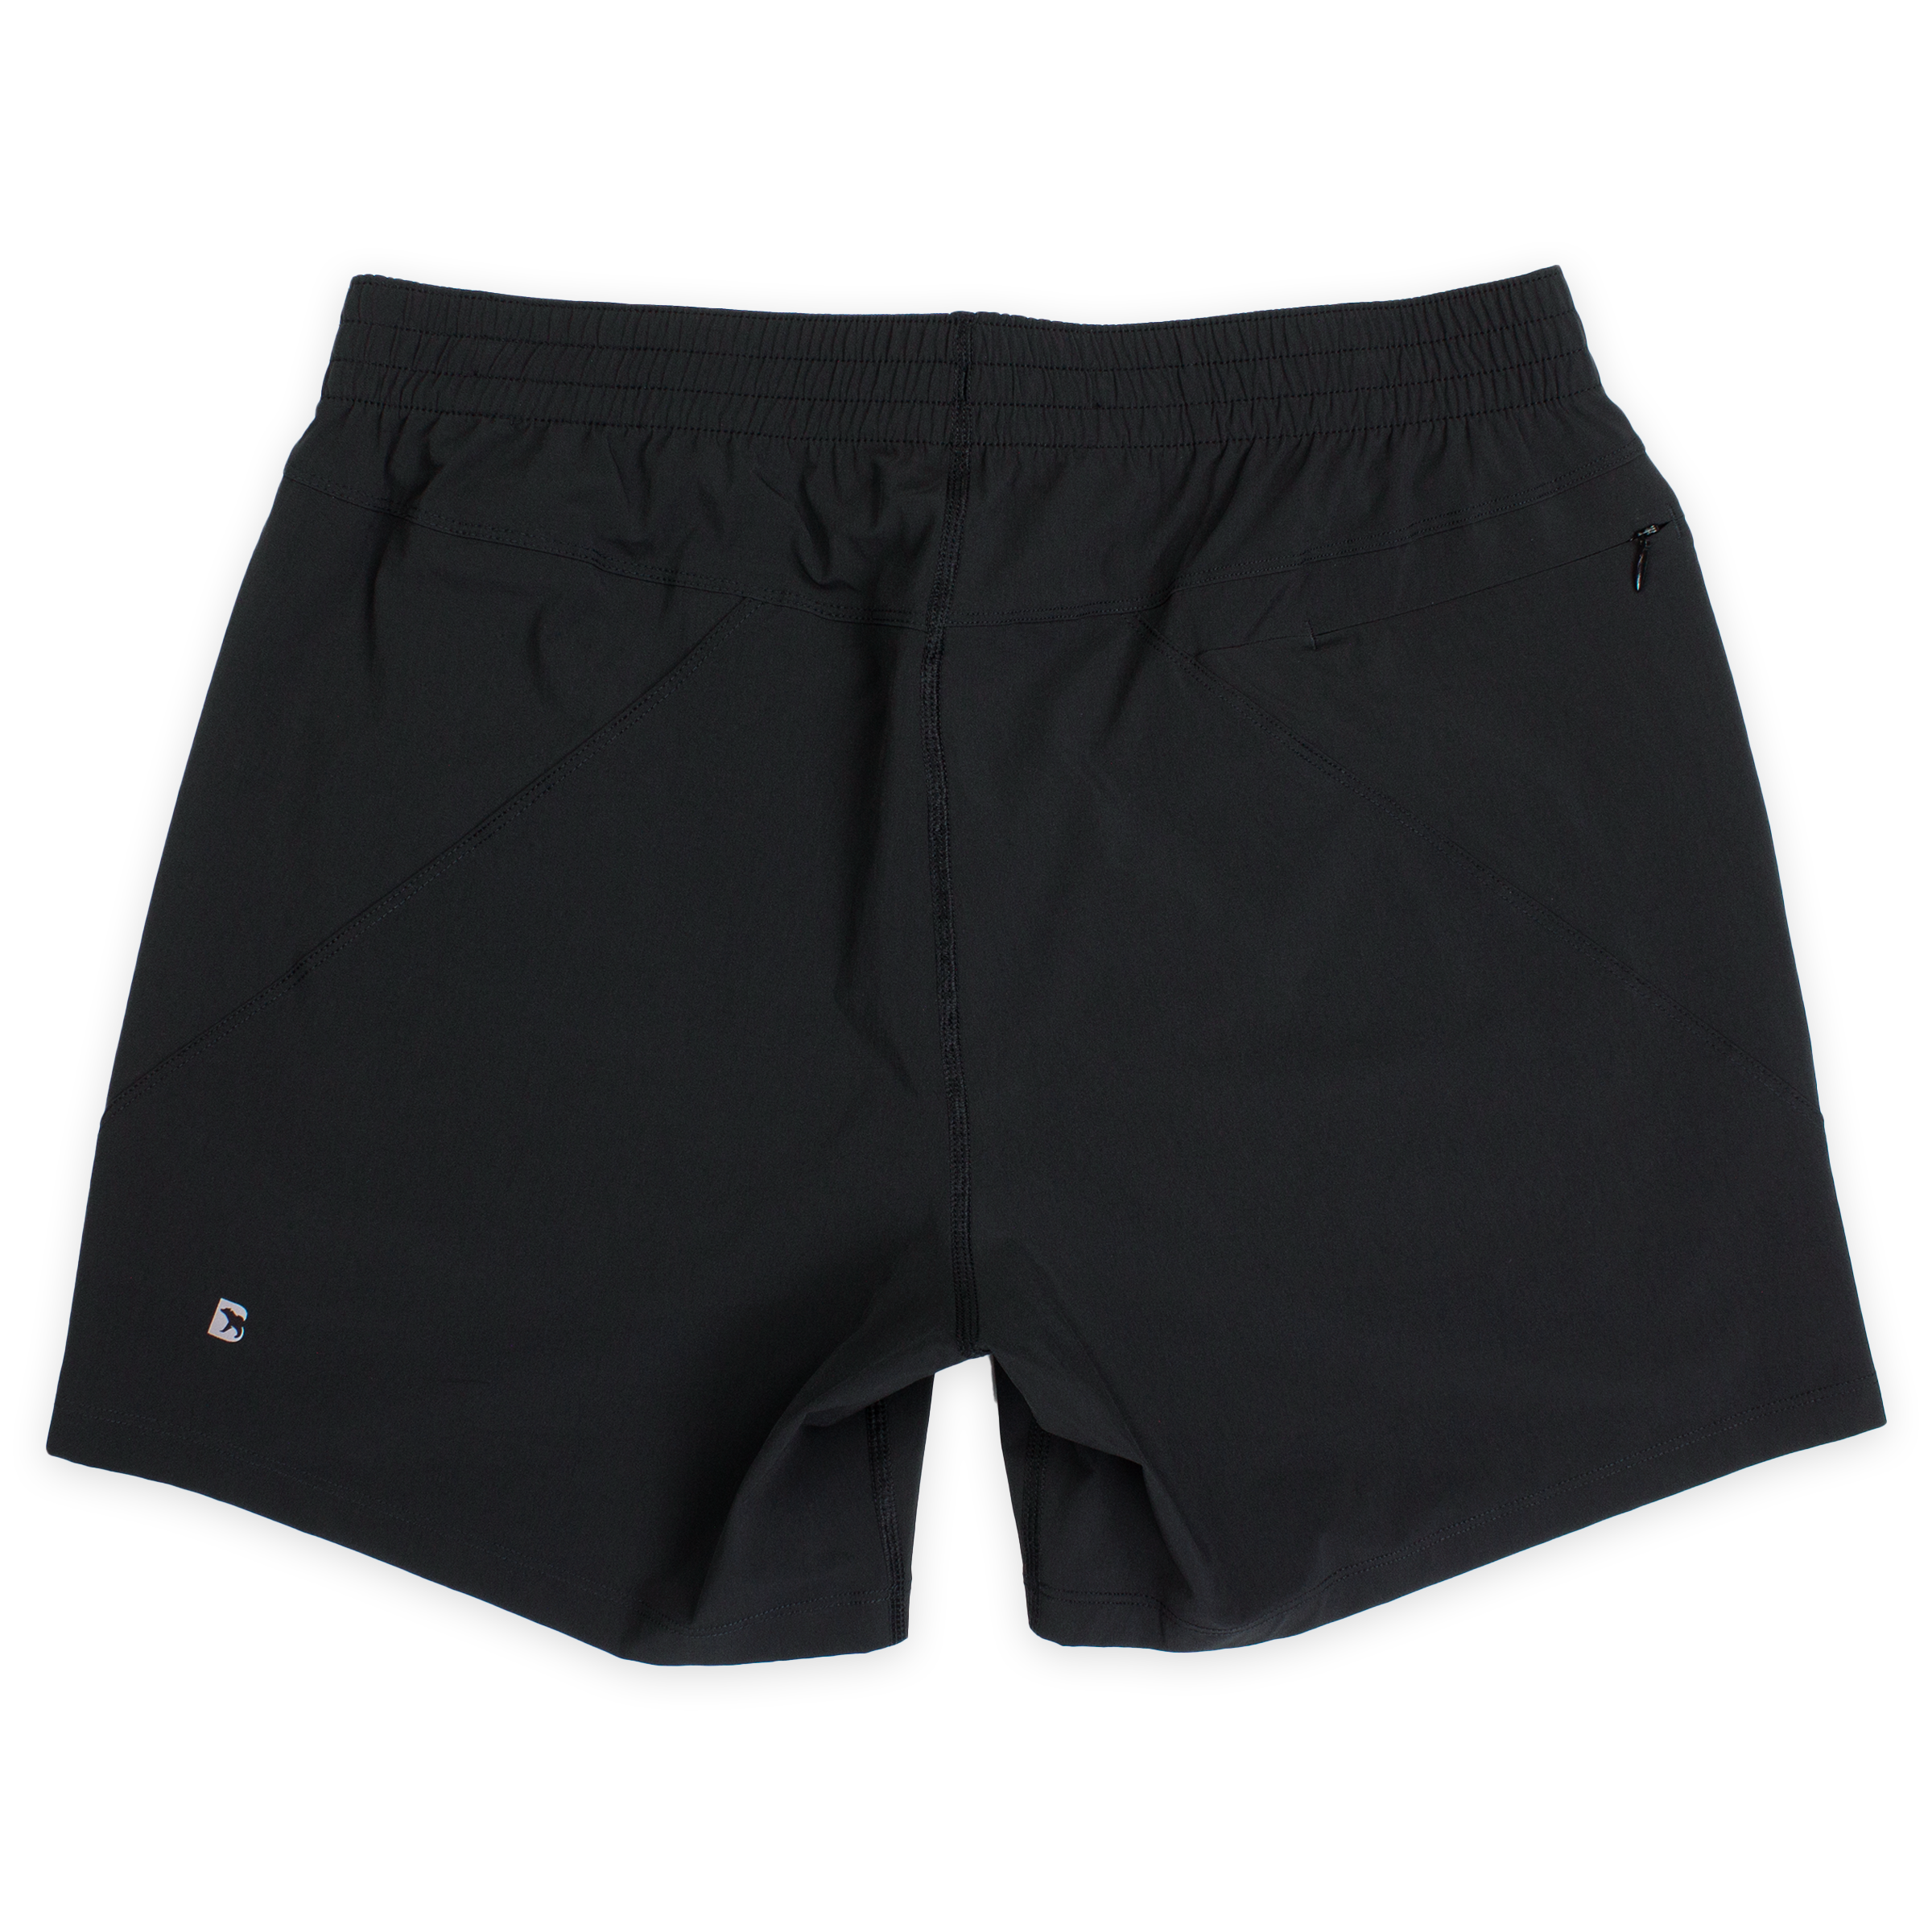 Atlas Short 5.5" Black Back with elastic waistband, back right zippered pocket, and small reflective logo of Bear drawn inside the letter B in bottom left corner